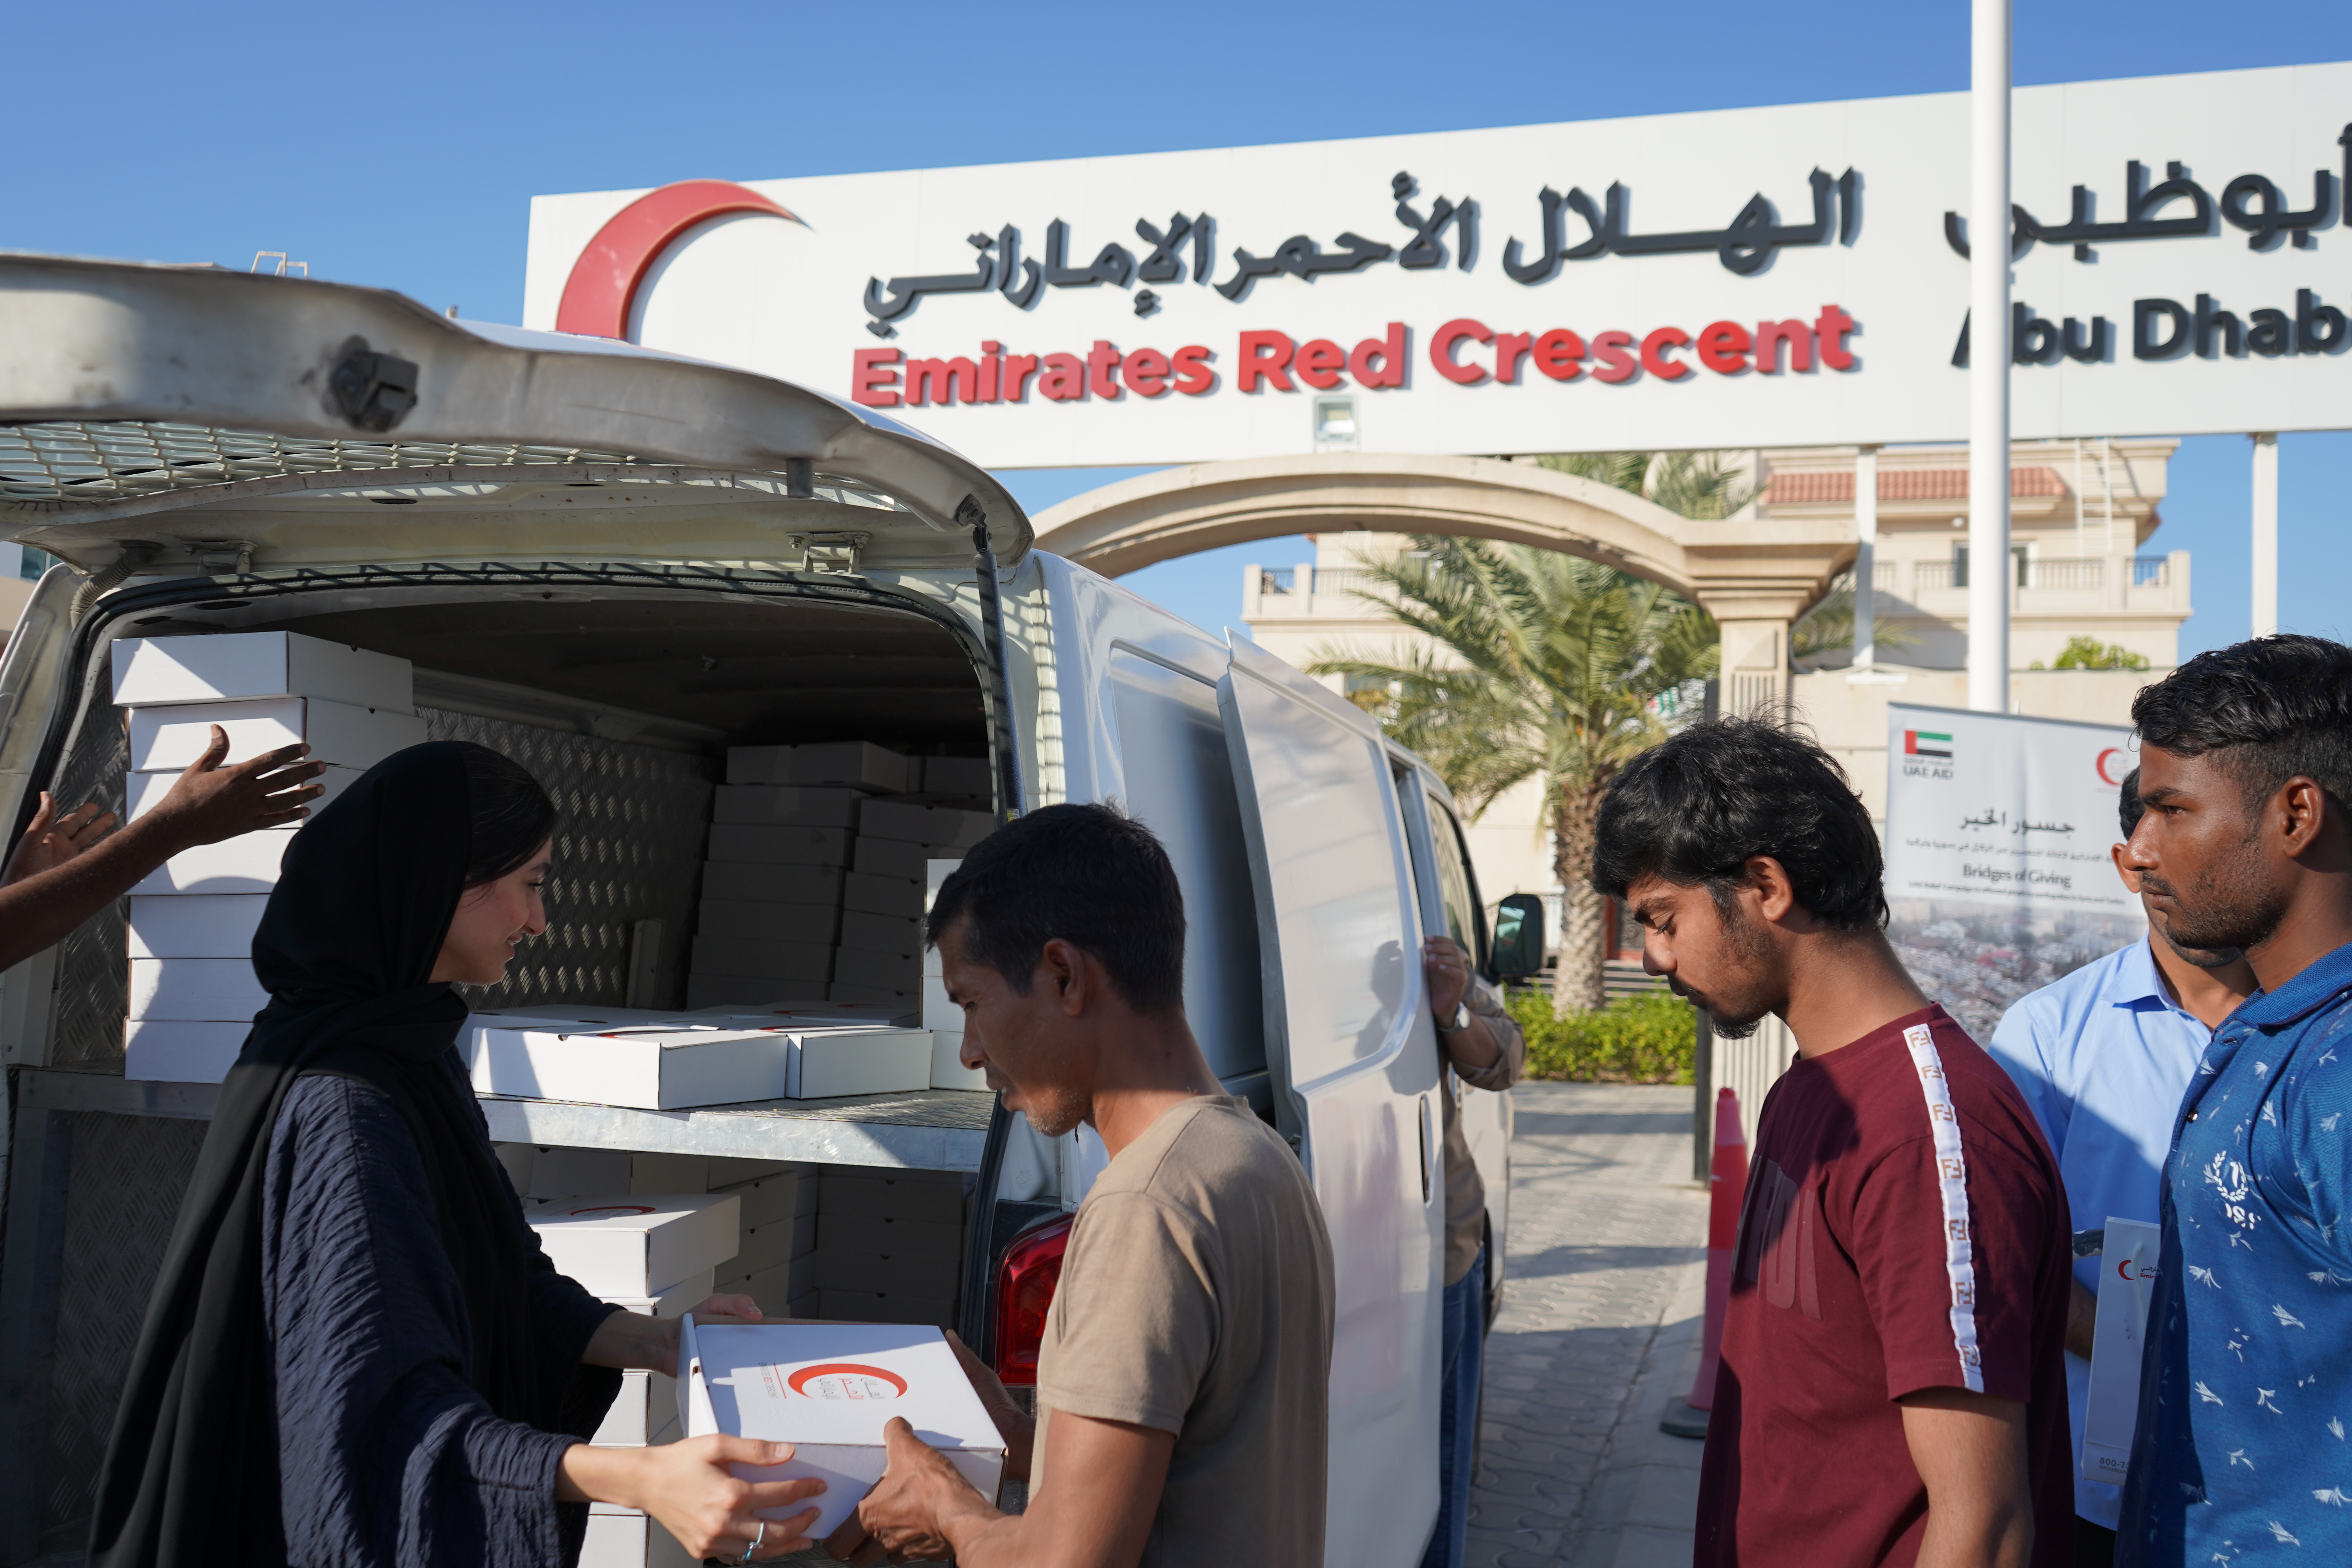 EWEC Donates Two Thousand Iftar Meals In Collaboration With Emirates Red Crescent